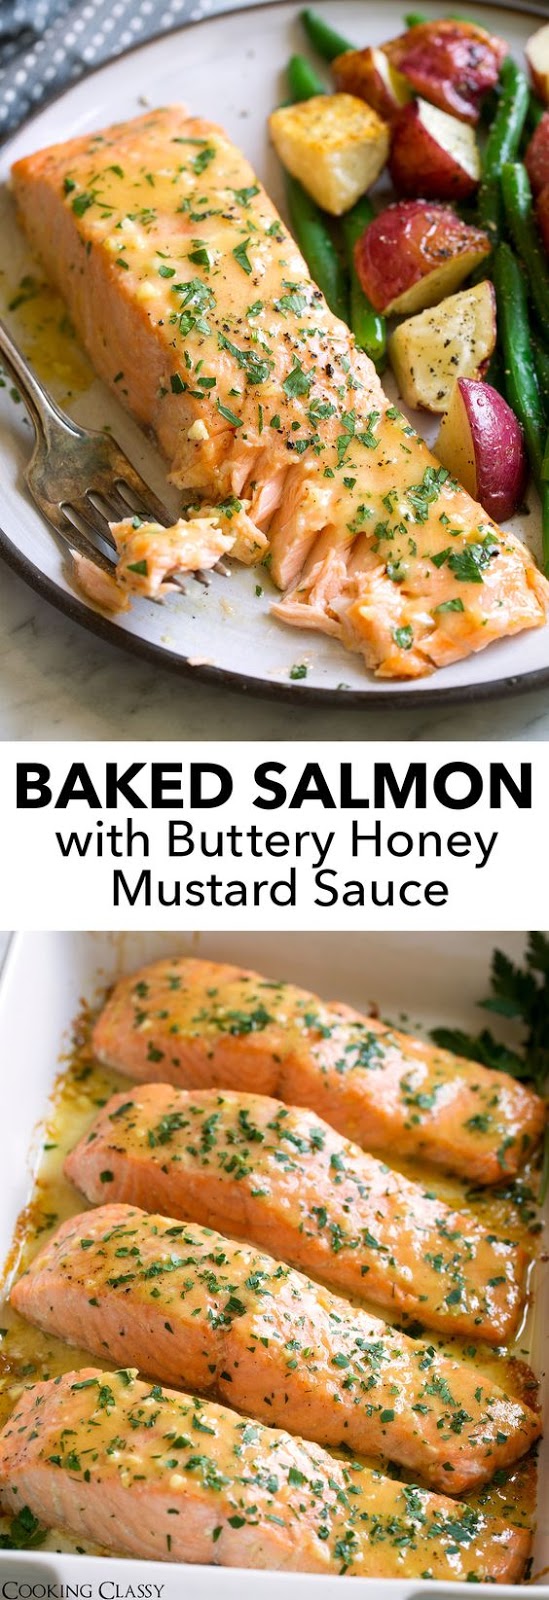 Baked Salmon with Buttery Honey Mustard Sauce - PodPoint